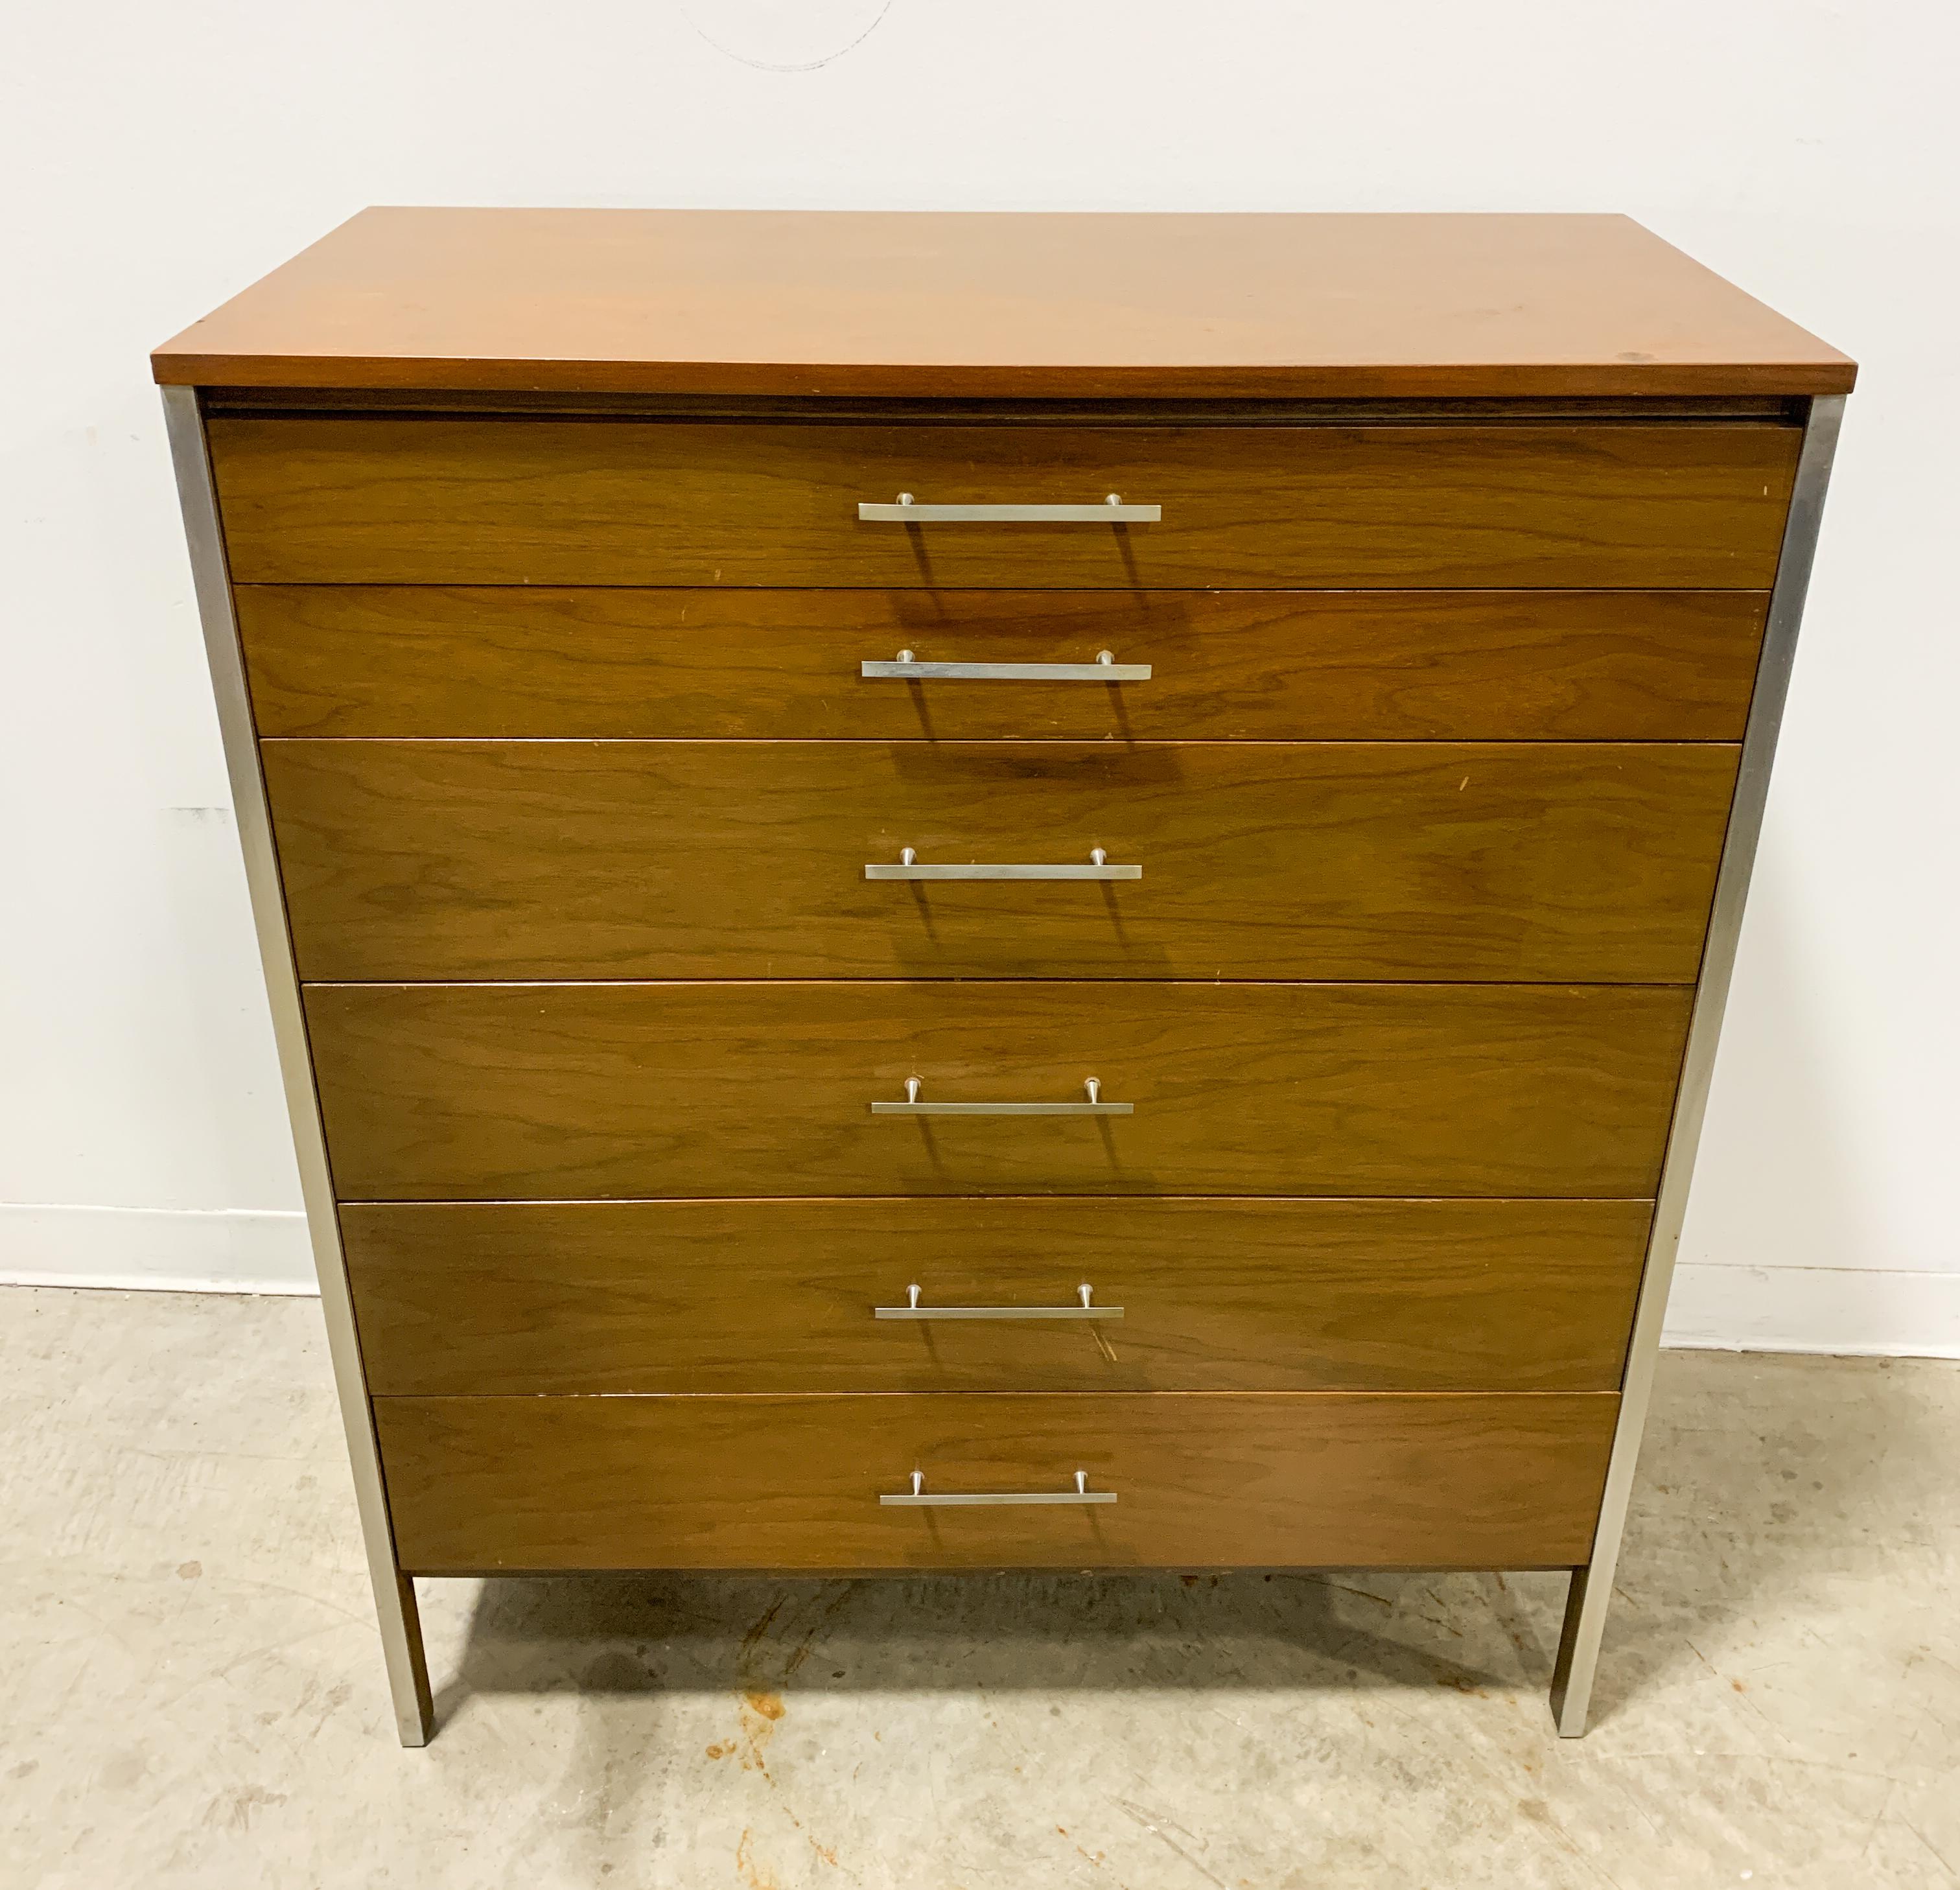 Tall dresser designed by Paul McCobb from the Linear line by Calvin Furniture. Walnut case with aluminum strips and cast aluminum pulls combine for a sharp modern look. This piece is in good original condition with occasional finish wear from age